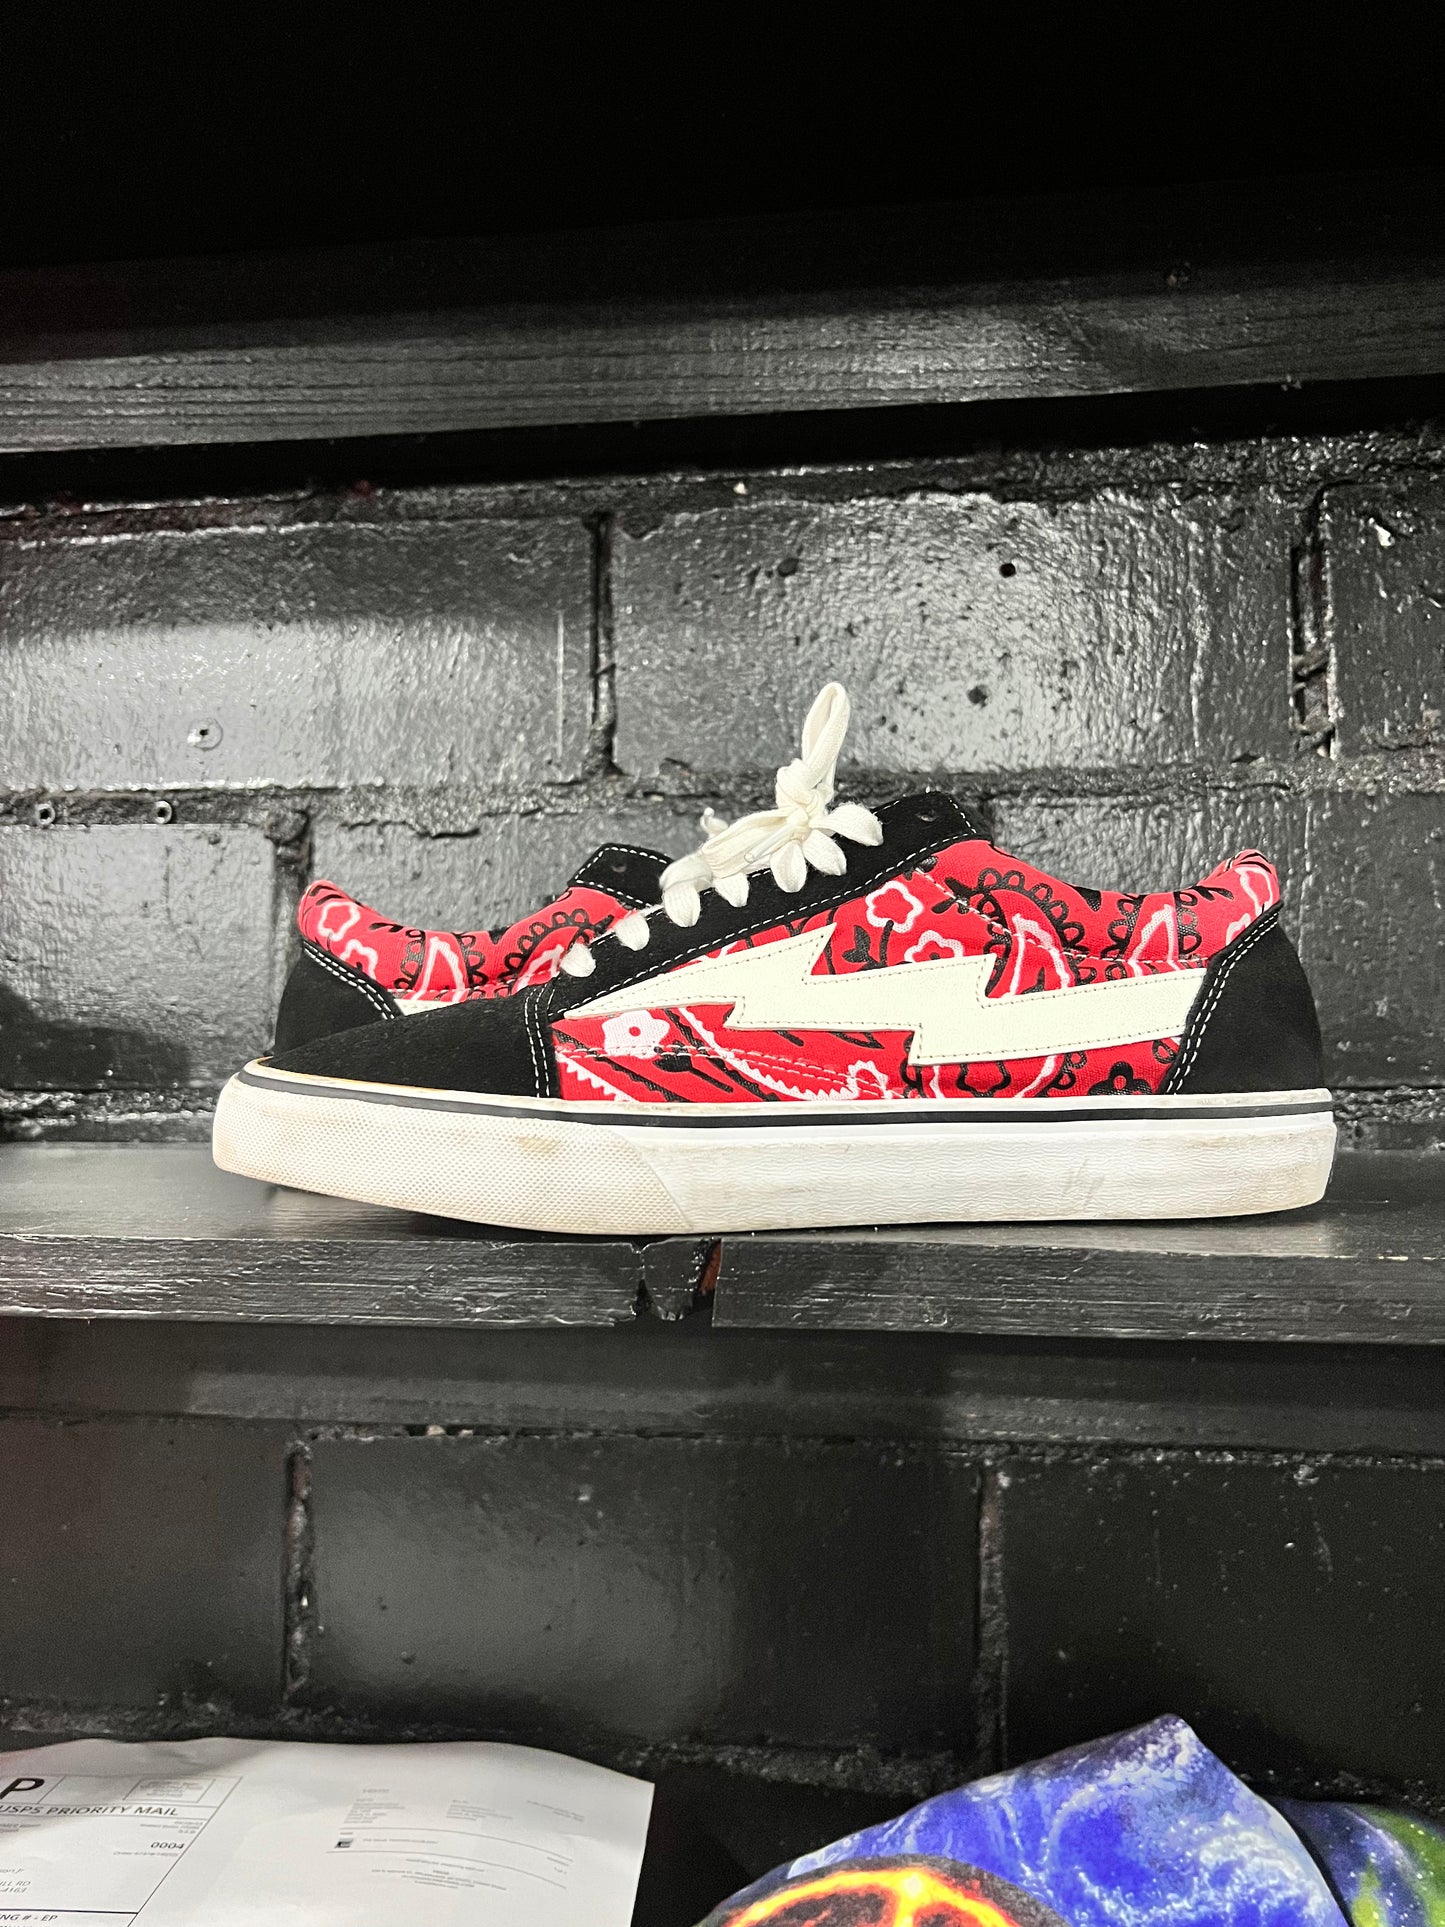 Revenge X Storm Red Size 11 (Trusted Club) (Hou)